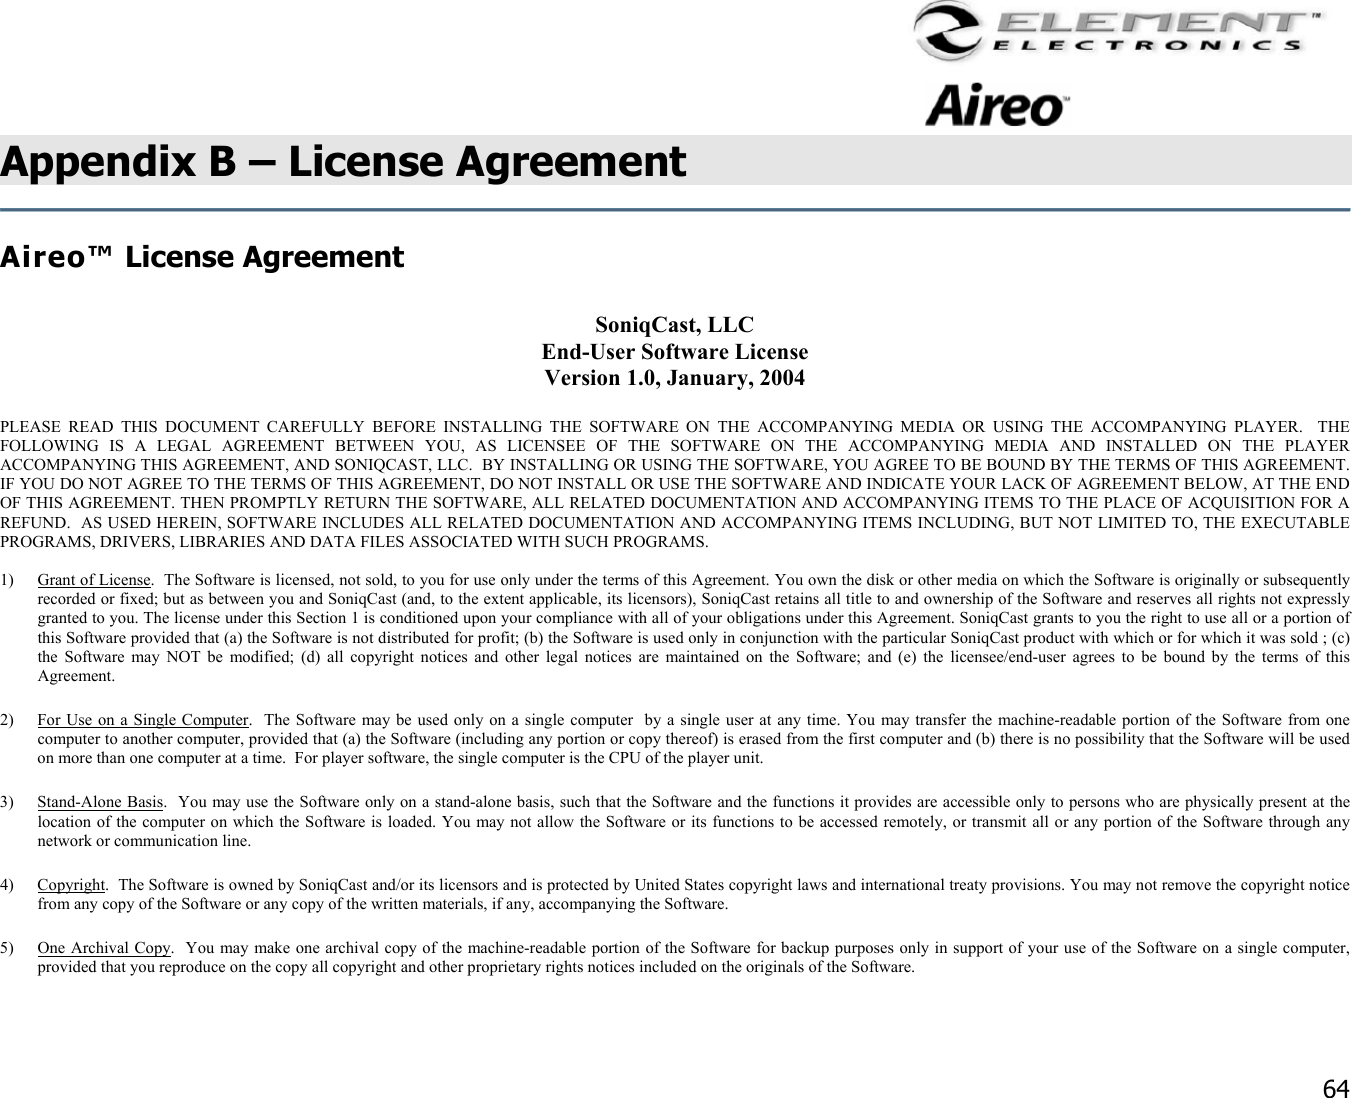                                                                                    64 Appendix B – License Agreement   Aireo™ License Agreement    SoniqCast, LLC  End-User Software License Version 1.0, January, 2004  PLEASE READ THIS DOCUMENT CAREFULLY BEFORE INSTALLING THE SOFTWARE ON THE ACCOMPANYING MEDIA OR USING THE ACCOMPANYING PLAYER.  THE FOLLOWING IS A LEGAL AGREEMENT BETWEEN YOU, AS LICENSEE OF THE SOFTWARE ON THE ACCOMPANYING MEDIA AND INSTALLED ON THE PLAYER ACCOMPANYING THIS AGREEMENT, AND SONIQCAST, LLC.  BY INSTALLING OR USING THE SOFTWARE, YOU AGREE TO BE BOUND BY THE TERMS OF THIS AGREEMENT.  IF YOU DO NOT AGREE TO THE TERMS OF THIS AGREEMENT, DO NOT INSTALL OR USE THE SOFTWARE AND INDICATE YOUR LACK OF AGREEMENT BELOW, AT THE END OF THIS AGREEMENT. THEN PROMPTLY RETURN THE SOFTWARE, ALL RELATED DOCUMENTATION AND ACCOMPANYING ITEMS TO THE PLACE OF ACQUISITION FOR A REFUND.  AS USED HEREIN, SOFTWARE INCLUDES ALL RELATED DOCUMENTATION AND ACCOMPANYING ITEMS INCLUDING, BUT NOT LIMITED TO, THE EXECUTABLE PROGRAMS, DRIVERS, LIBRARIES AND DATA FILES ASSOCIATED WITH SUCH PROGRAMS.  1)  Grant of License.  The Software is licensed, not sold, to you for use only under the terms of this Agreement. You own the disk or other media on which the Software is originally or subsequently recorded or fixed; but as between you and SoniqCast (and, to the extent applicable, its licensors), SoniqCast retains all title to and ownership of the Software and reserves all rights not expressly granted to you. The license under this Section 1 is conditioned upon your compliance with all of your obligations under this Agreement. SoniqCast grants to you the right to use all or a portion of this Software provided that (a) the Software is not distributed for profit; (b) the Software is used only in conjunction with the particular SoniqCast product with which or for which it was sold ; (c) the Software may NOT be modified; (d) all copyright notices and other legal notices are maintained on the Software; and (e) the licensee/end-user agrees to be bound by the terms of this Agreement.  2)  For Use on a Single Computer.  The Software may be used only on a single computer  by a single user at any time. You may transfer the machine-readable portion of the Software from one computer to another computer, provided that (a) the Software (including any portion or copy thereof) is erased from the first computer and (b) there is no possibility that the Software will be used on more than one computer at a time.  For player software, the single computer is the CPU of the player unit. 3) Stand-Alone Basis.  You may use the Software only on a stand-alone basis, such that the Software and the functions it provides are accessible only to persons who are physically present at the location of the computer on which the Software is loaded. You may not allow the Software or its functions to be accessed remotely, or transmit all or any portion of the Software through any network or communication line. 4) Copyright.  The Software is owned by SoniqCast and/or its licensors and is protected by United States copyright laws and international treaty provisions. You may not remove the copyright notice from any copy of the Software or any copy of the written materials, if any, accompanying the Software. 5)  One Archival Copy.  You may make one archival copy of the machine-readable portion of the Software for backup purposes only in support of your use of the Software on a single computer, provided that you reproduce on the copy all copyright and other proprietary rights notices included on the originals of the Software. 